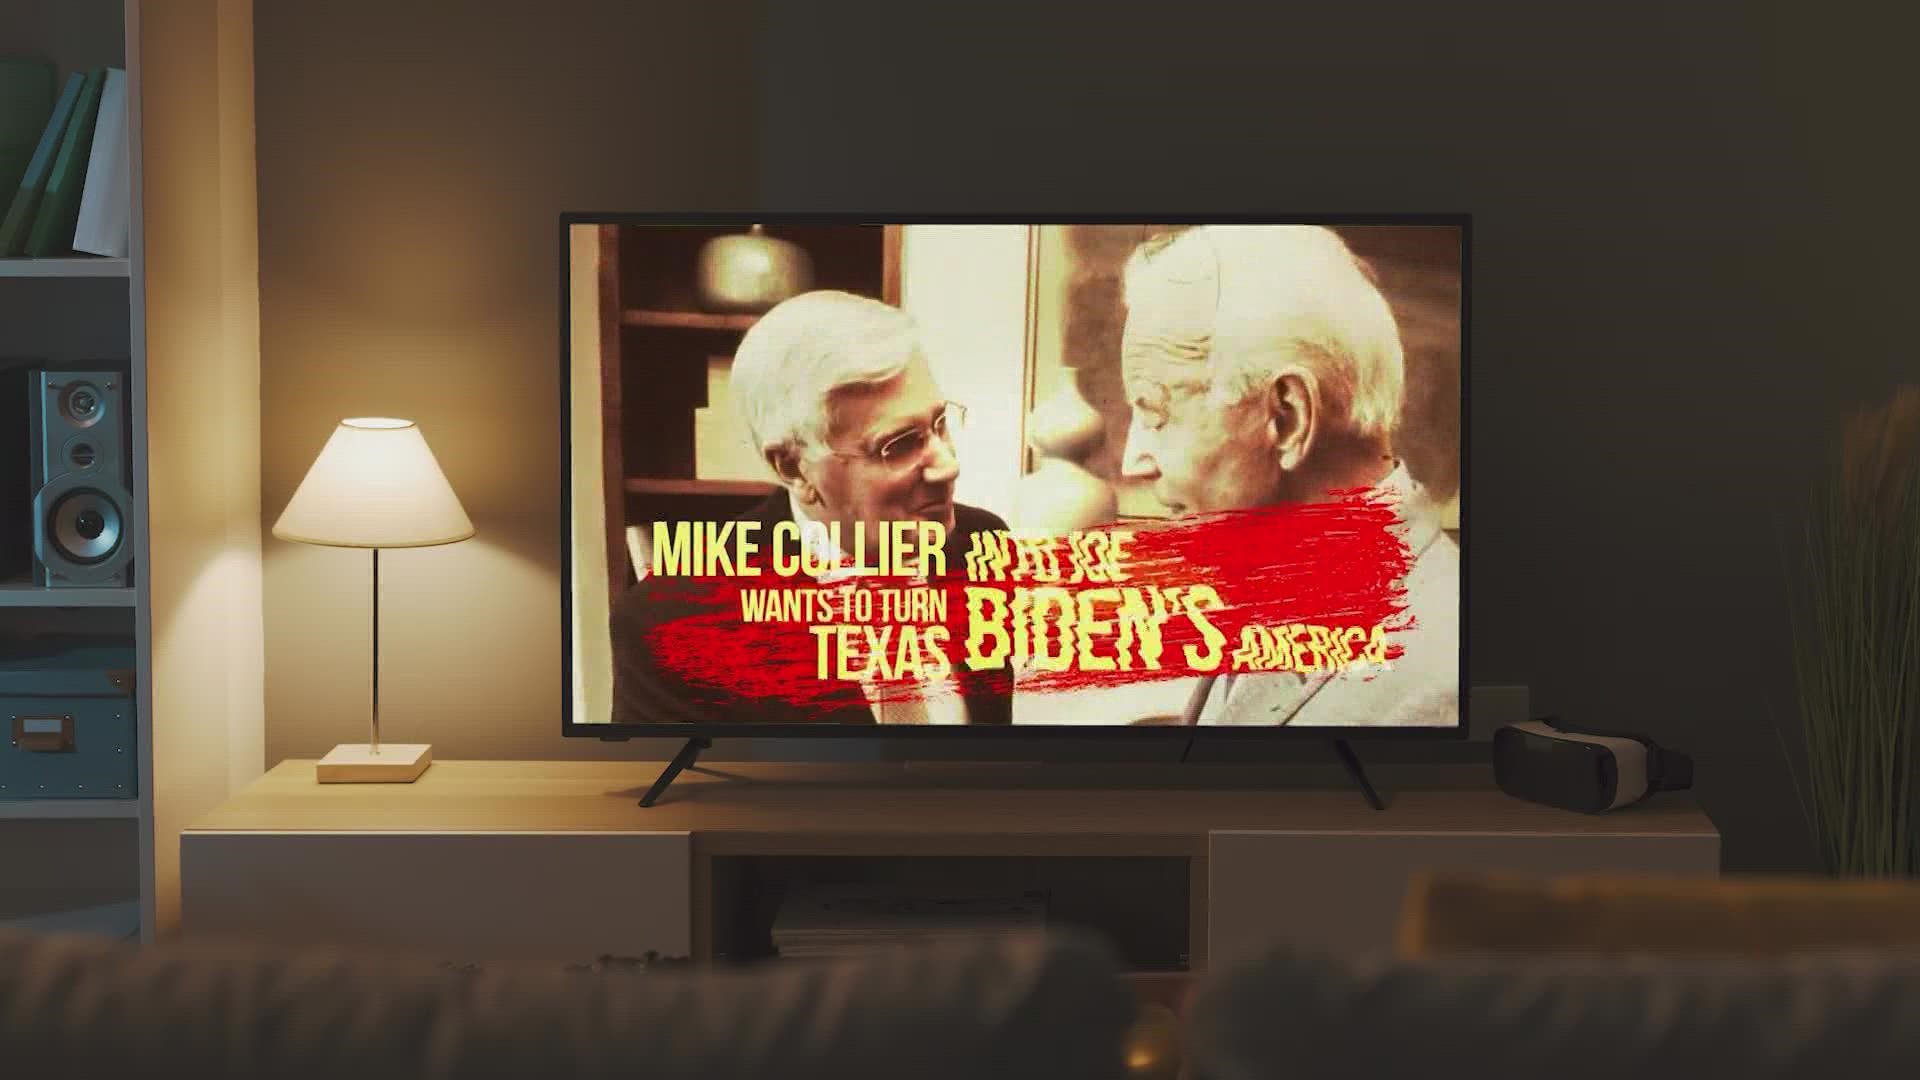 Mike Collier's campaign says Dan Patrick's ad makes uncited claims. The incumbent Texas lieutenant governor's campaign stands by the commercial.